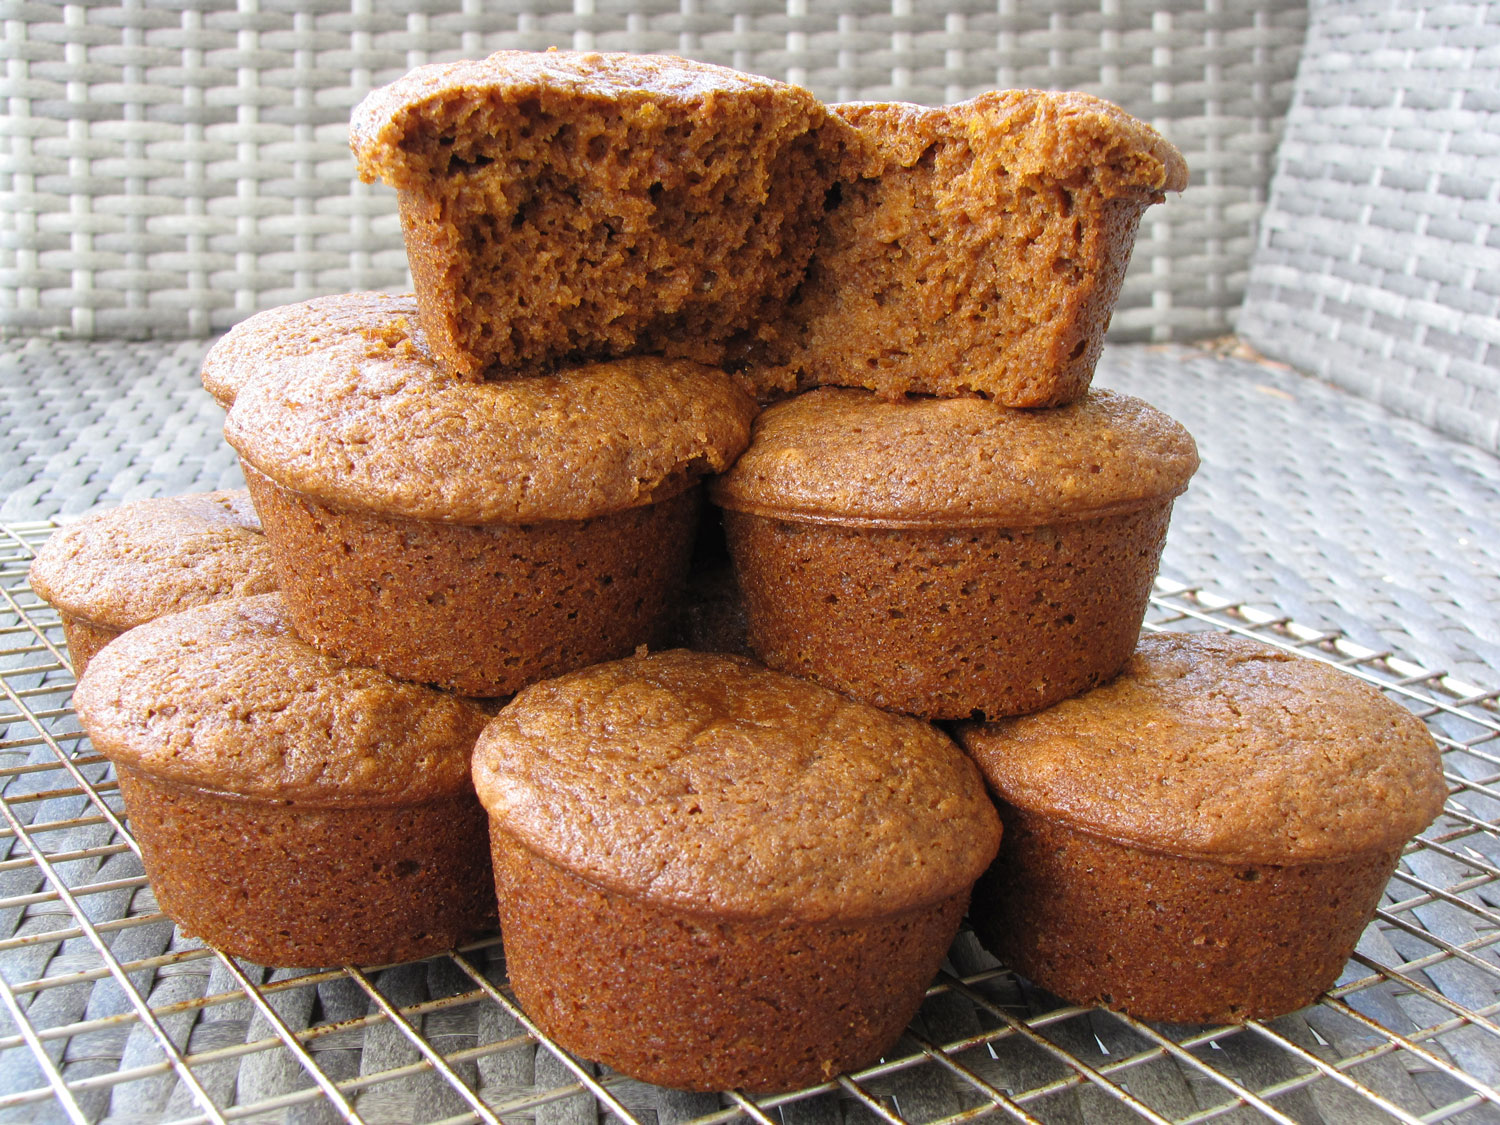 DIY Recipe: How to make gingerbread muffins